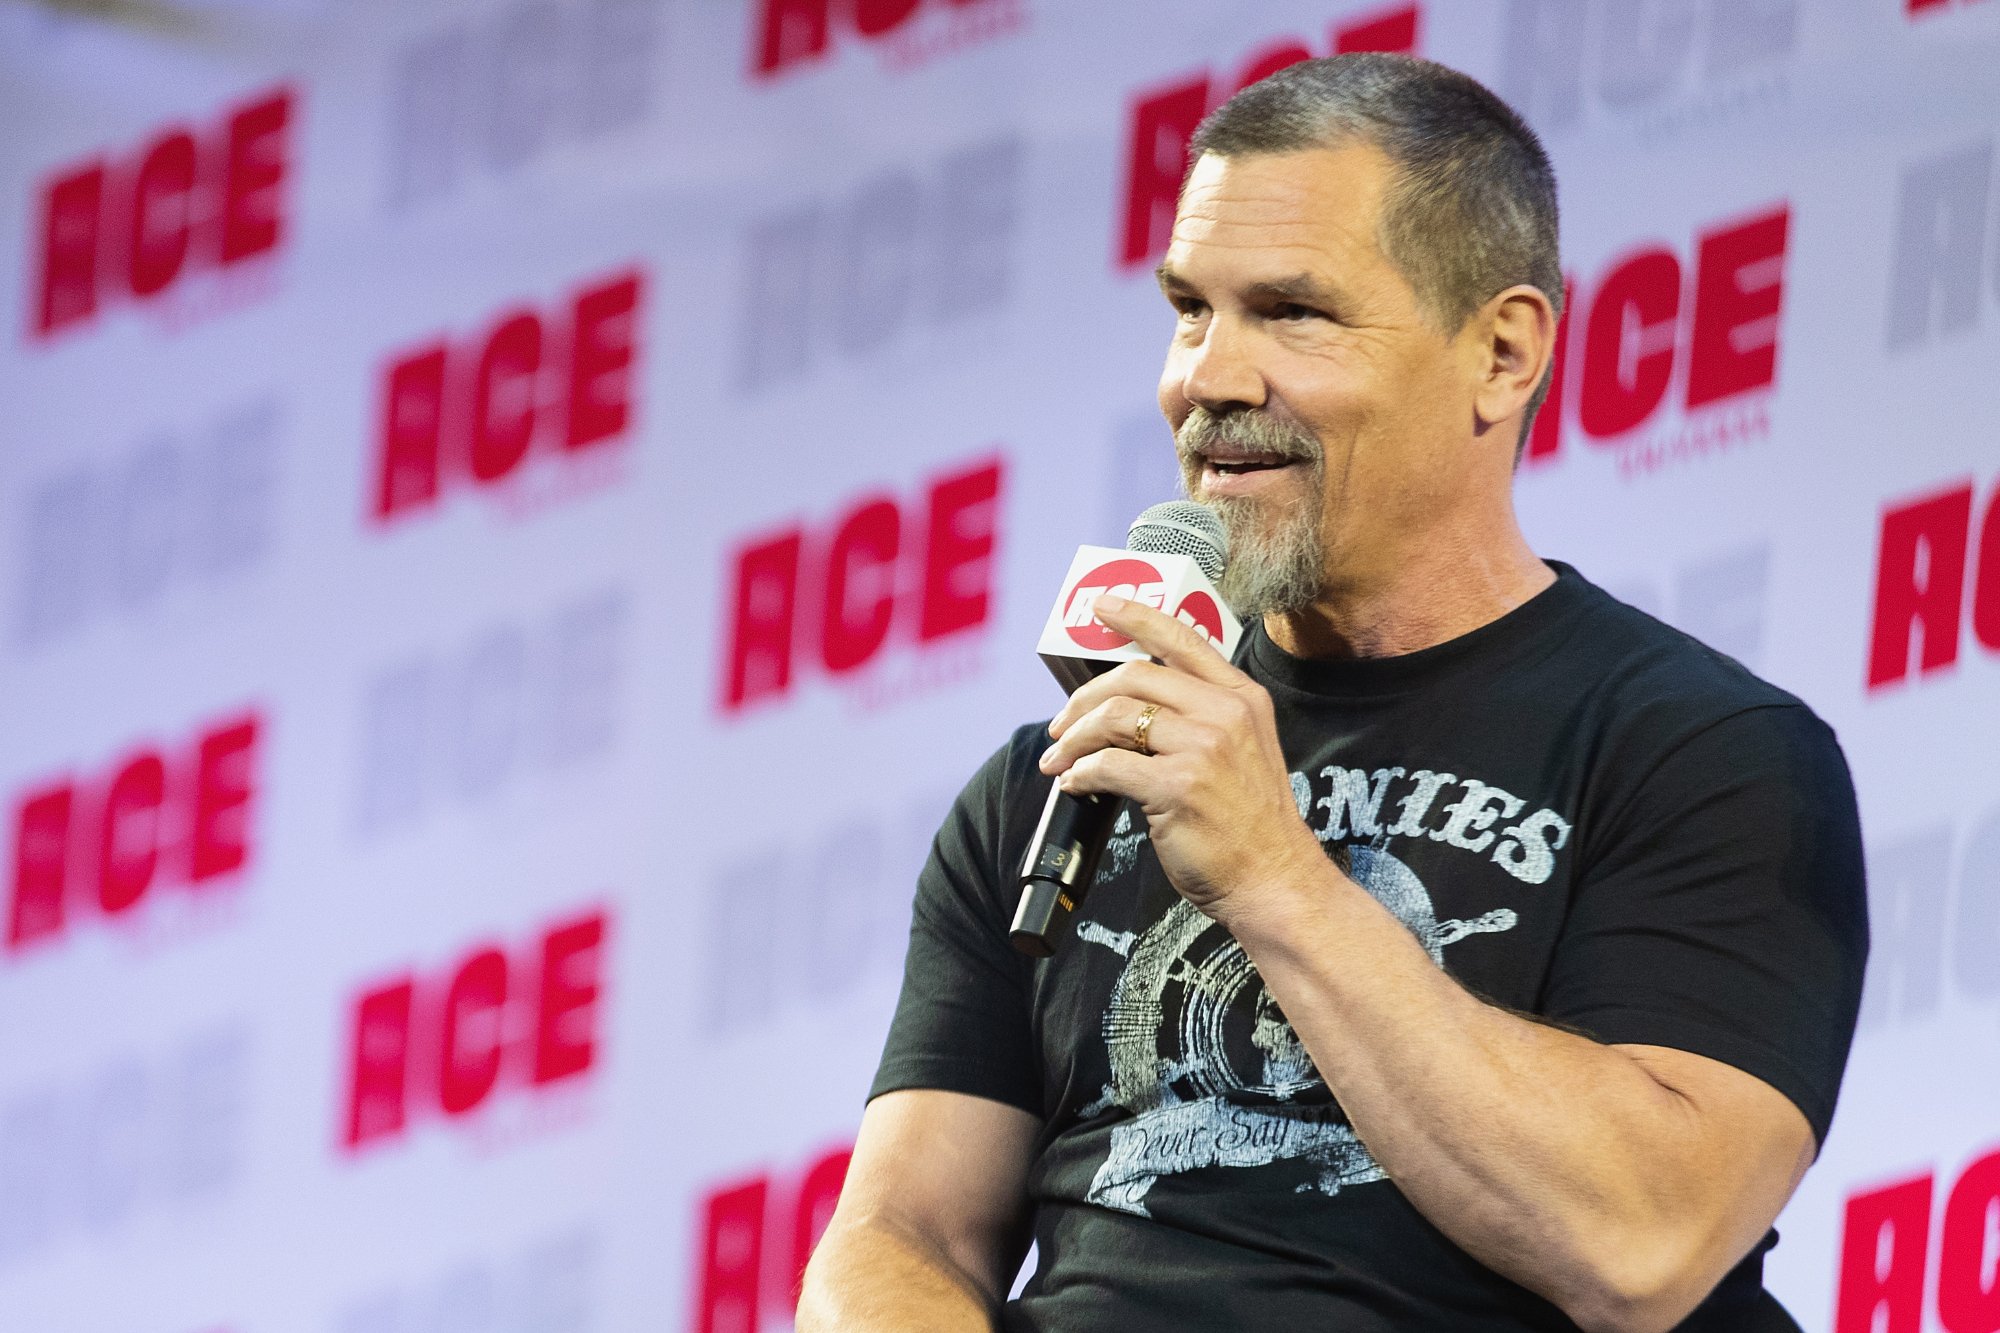 Coen Brothers' 'No Country for Old Men' star Josh Brolin talking into a microphone in front of ACE logo